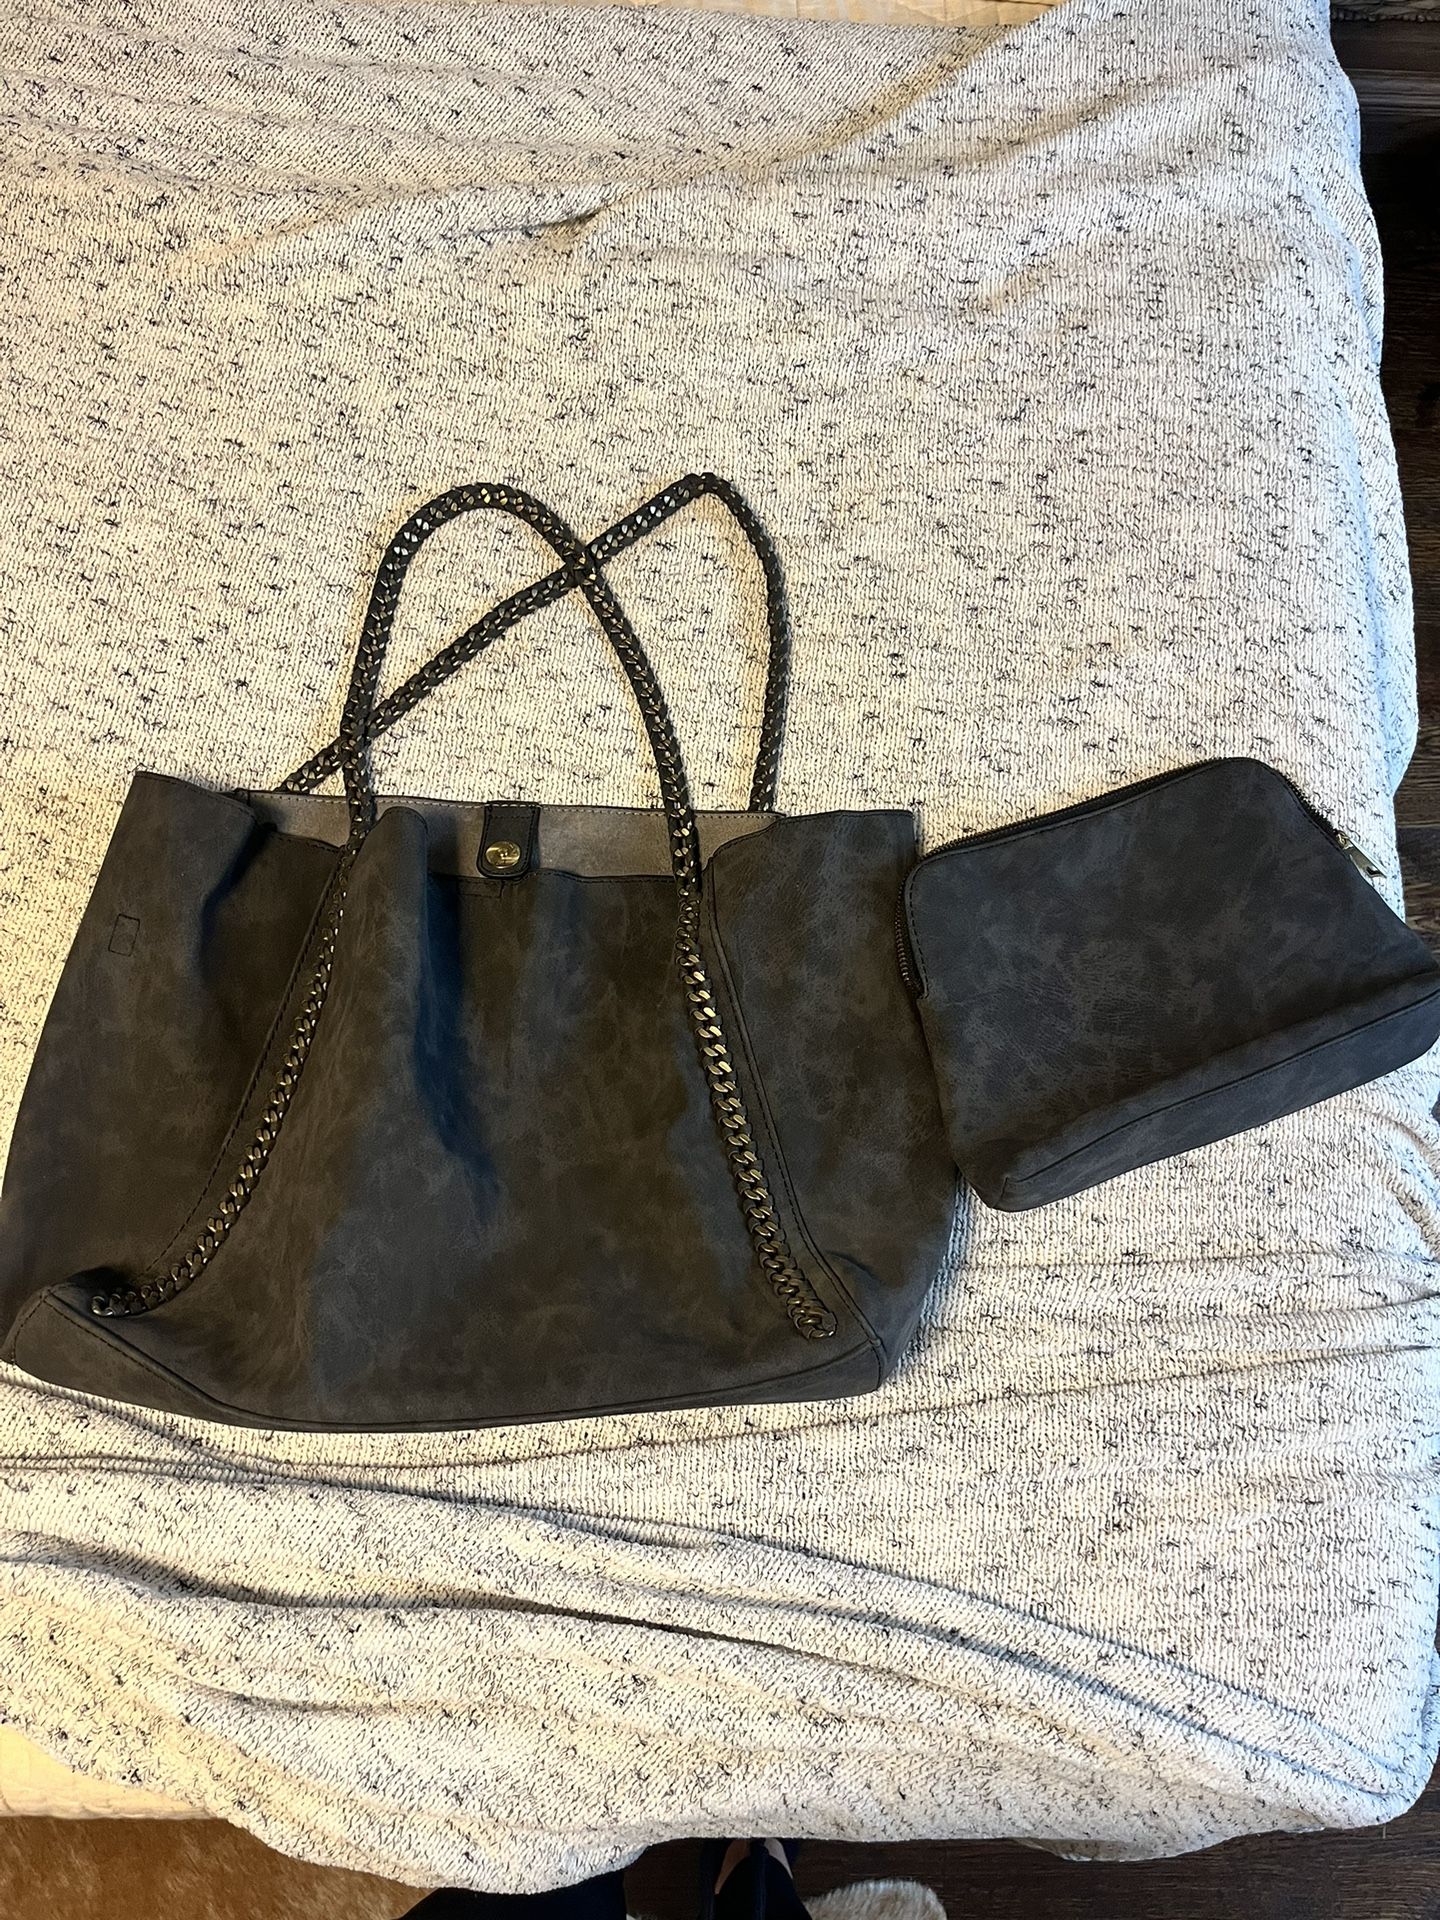 Dark Gray Unstructured Tote + Pouch (never used)